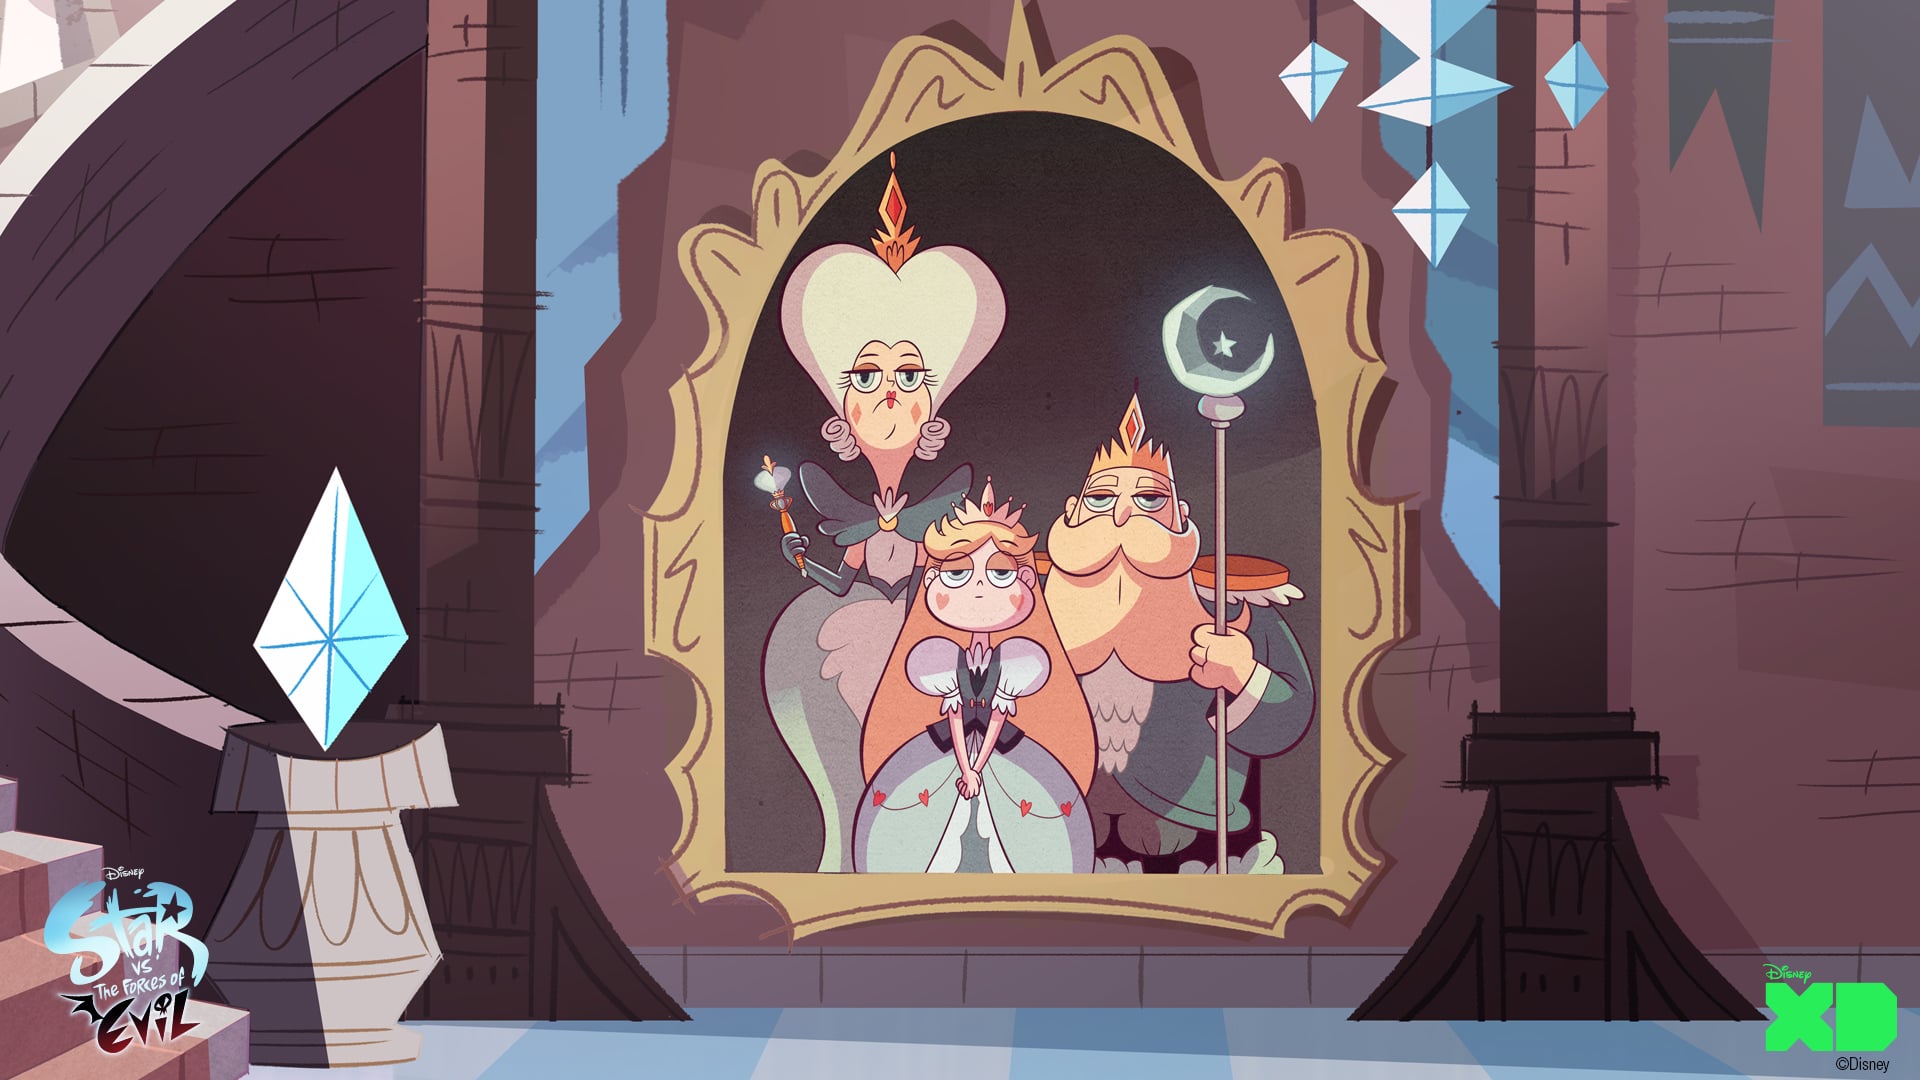 Star Vs The Forces Of Evil Zoom Background Perk Up Family Video Chats With These Disney Junior Zoom Backgrounds Popsugar Family Photo 15